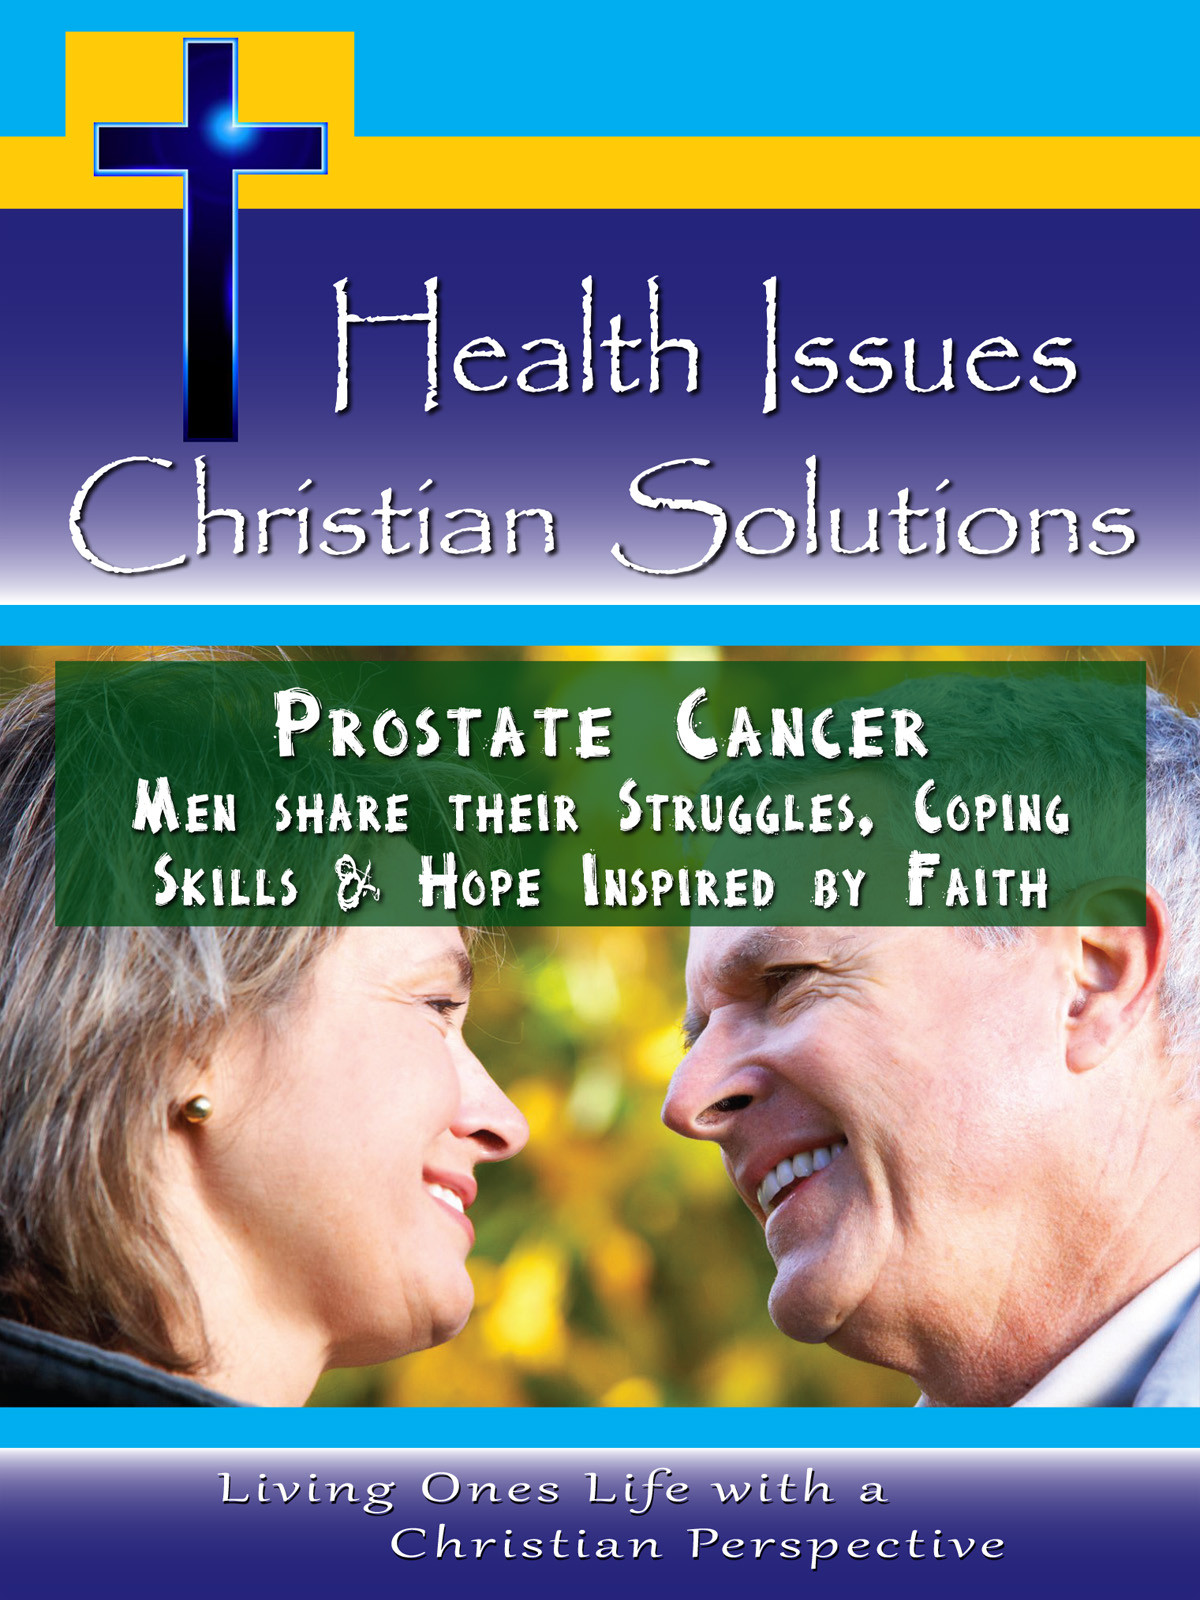 CH10029 - Prostate Cancer Men share their Struggles, Coping Skills & Hope Inspired by Faith